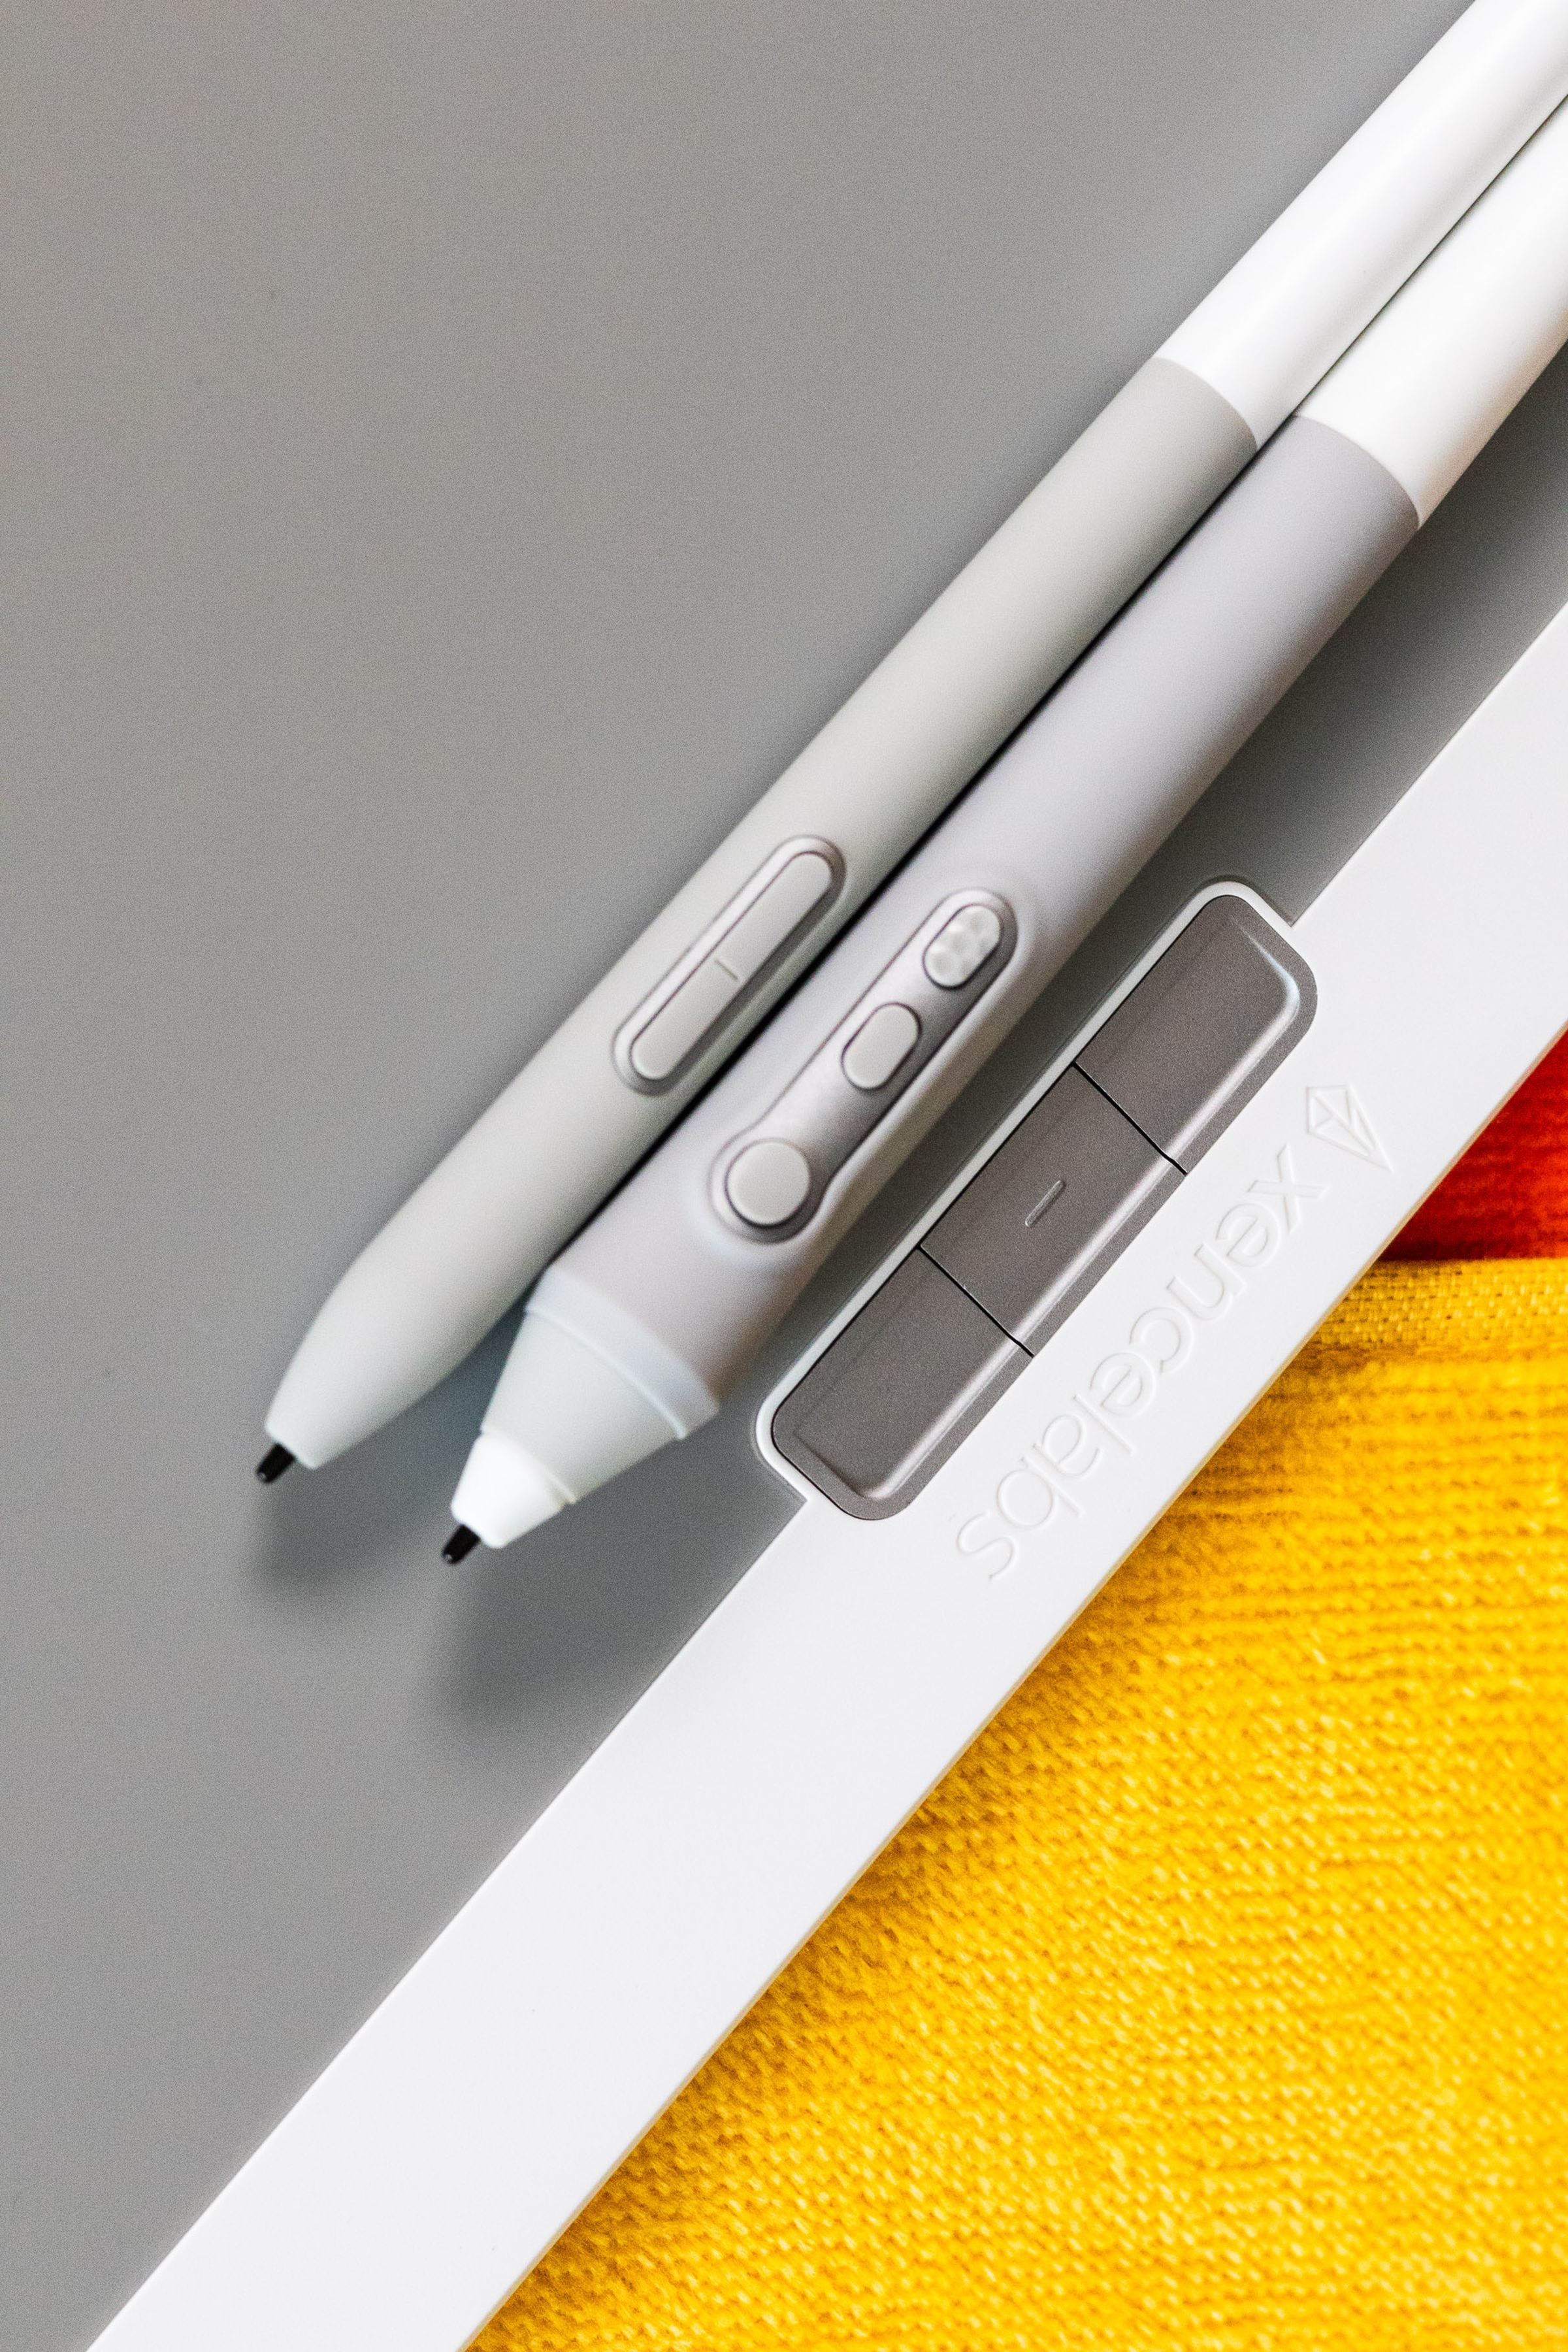 The Xencelabs Pen Tablet styluses resting against the tablet.